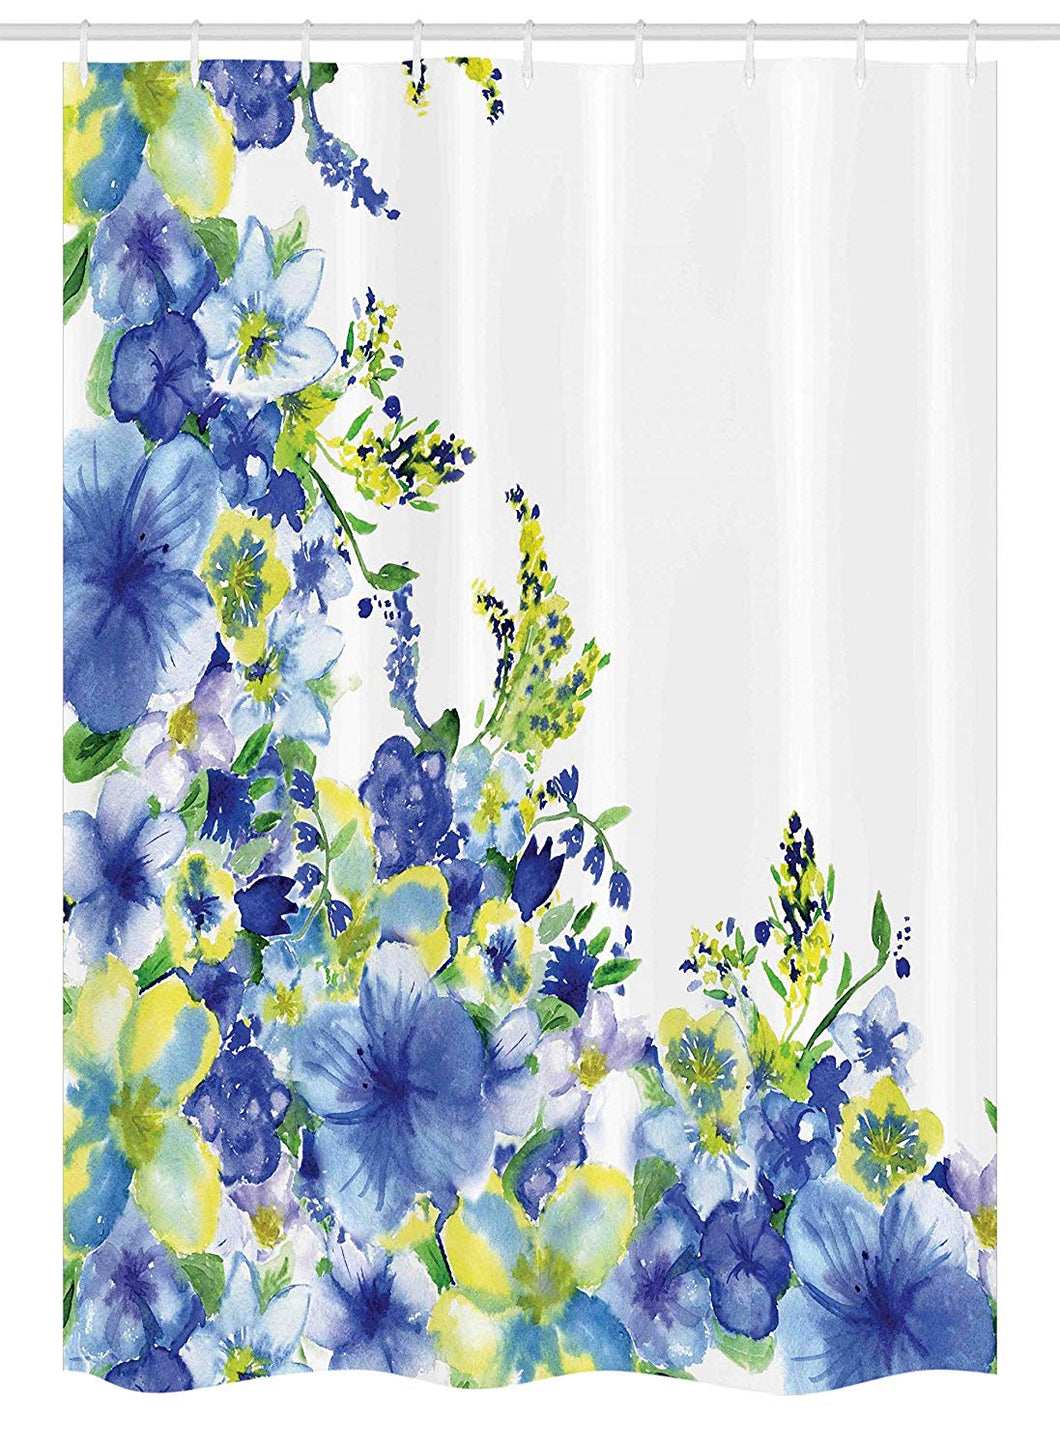 Ambesonne Watercolor Flower Stall Shower Curtain, Motley Floret Motifs with Splash Anemone Iris Revival of Nature Theme, Fabric Bathroom Decor Set with Hooks, 54